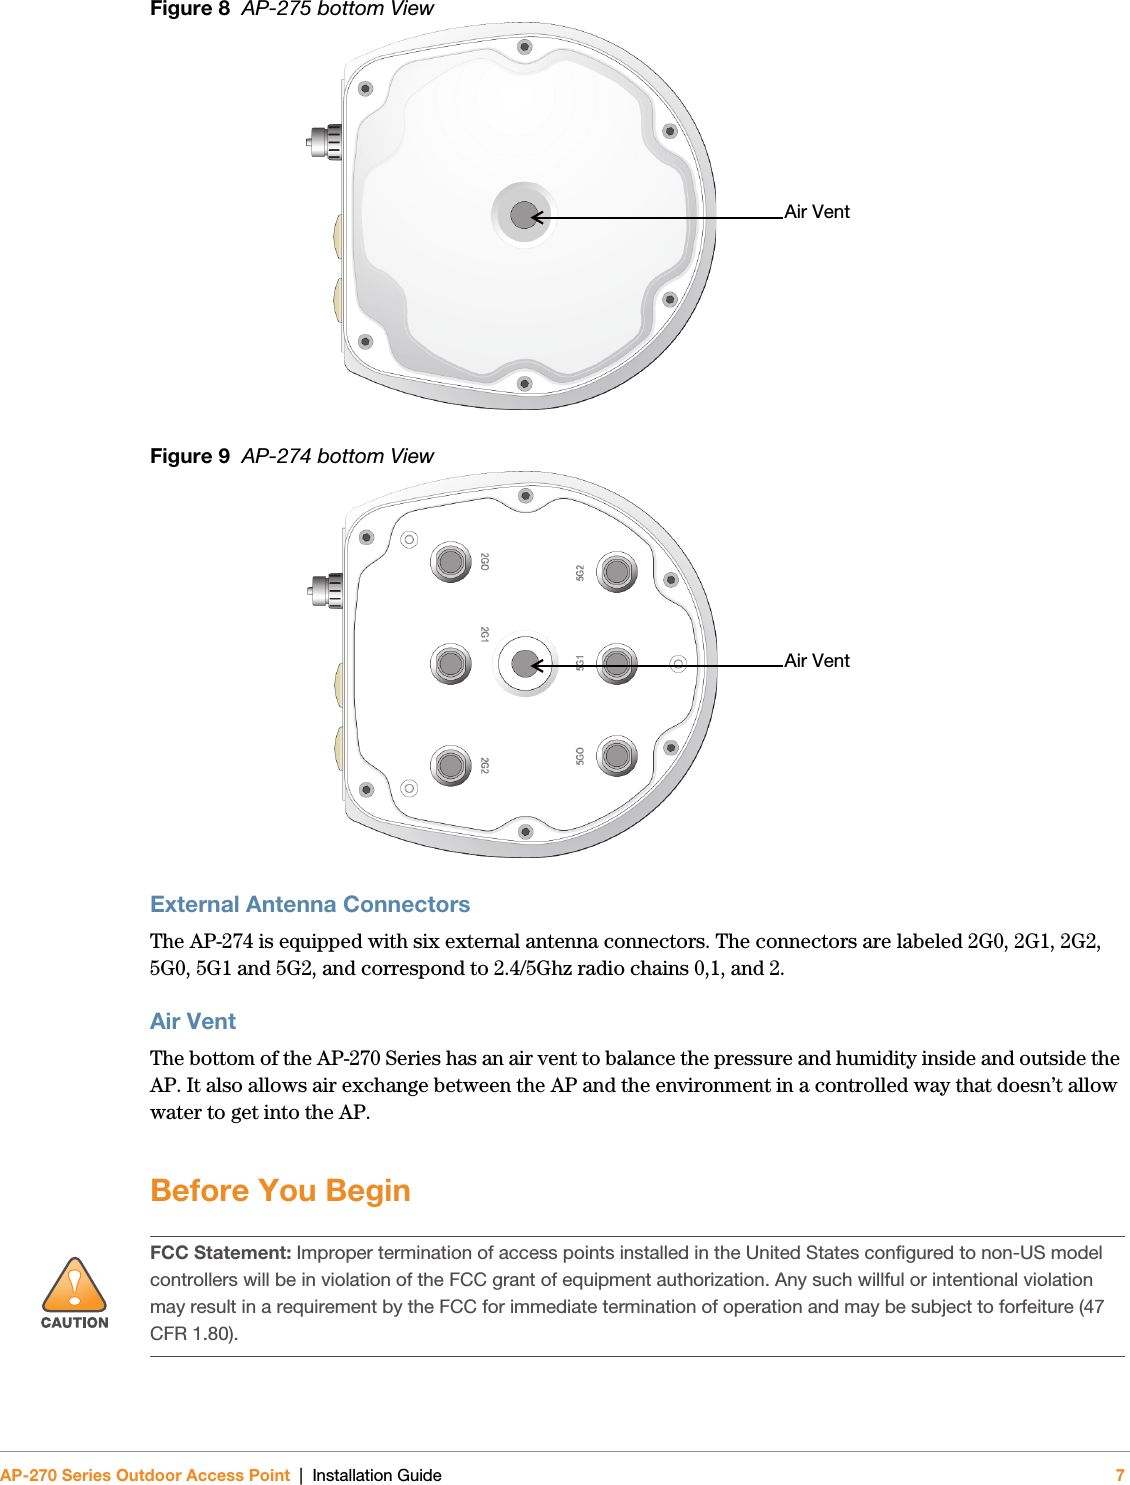 AP-270 Series Outdoor Access Point | Installation Guide 7Figure 8  AP-275 bottom ViewFigure 9  AP-274 bottom ViewExternal Antenna ConnectorsThe AP-274 is equipped with six external antenna connectors. The connectors are labeled 2G0, 2G1, 2G2, 5G0, 5G1 and 5G2, and correspond to 2.4/5Ghz radio chains 0,1, and 2.Air VentThe bottom of the AP-270 Series has an air vent to balance the pressure and humidity inside and outside the AP. It also allows air exchange between the AP and the environment in a controlled way that doesn’t allow water to get into the AP.Before You BeginAir VentAir Vent!FCC Statement: Improper termination of access points installed in the United States configured to non-US model controllers will be in violation of the FCC grant of equipment authorization. Any such willful or intentional violation may result in a requirement by the FCC for immediate termination of operation and may be subject to forfeiture (47 CFR 1.80).